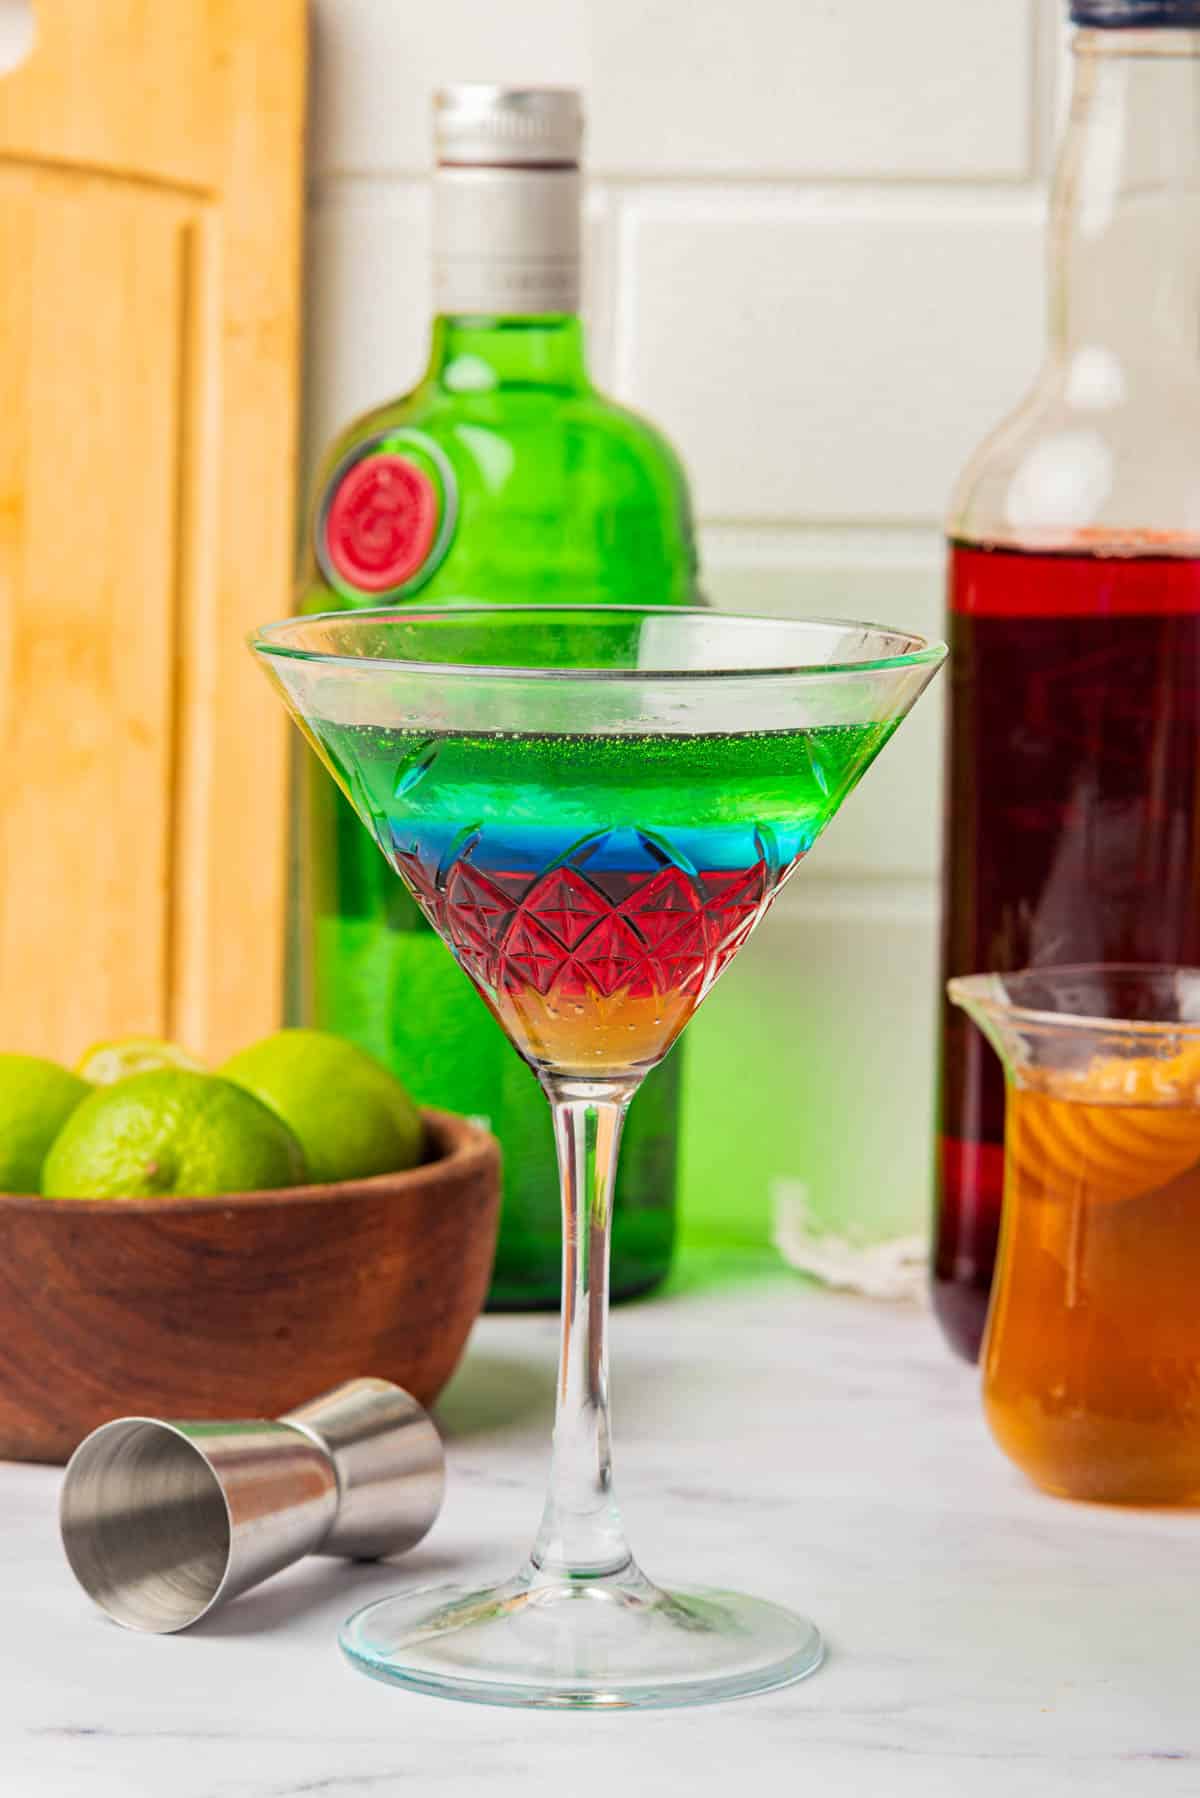 Martini glass with liquid in the colors of the Olympic Rings with a jigger on side, limes, bottles, and honey in background.